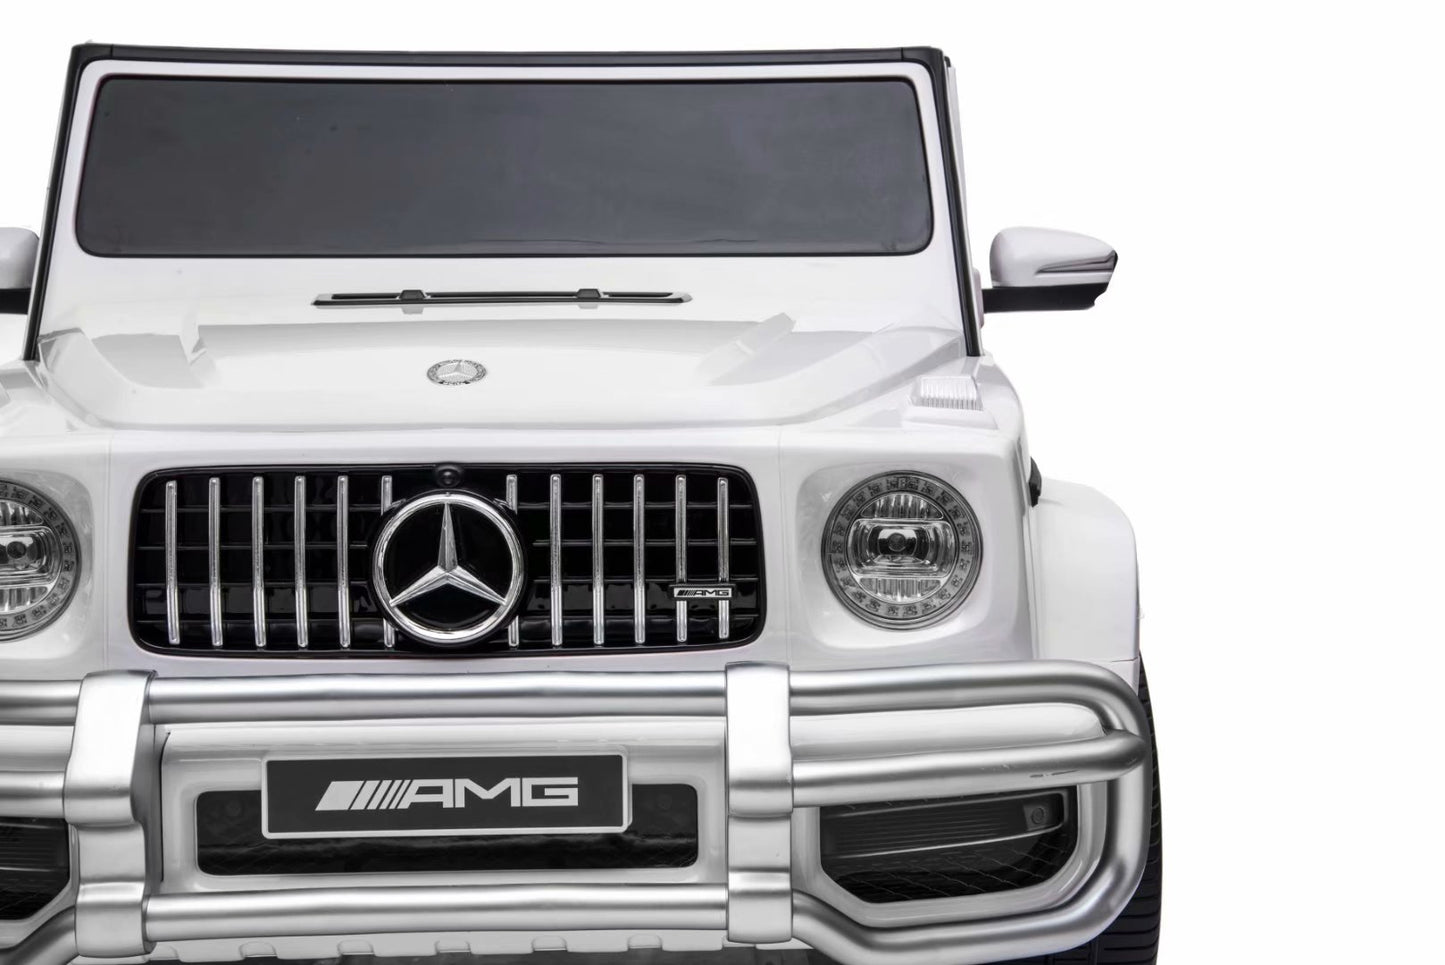 24V 2Seat Luxury Licensed Mercedes G63 AMG, Parental Remote, Rubber Tire, Leather Seats, Music MP3